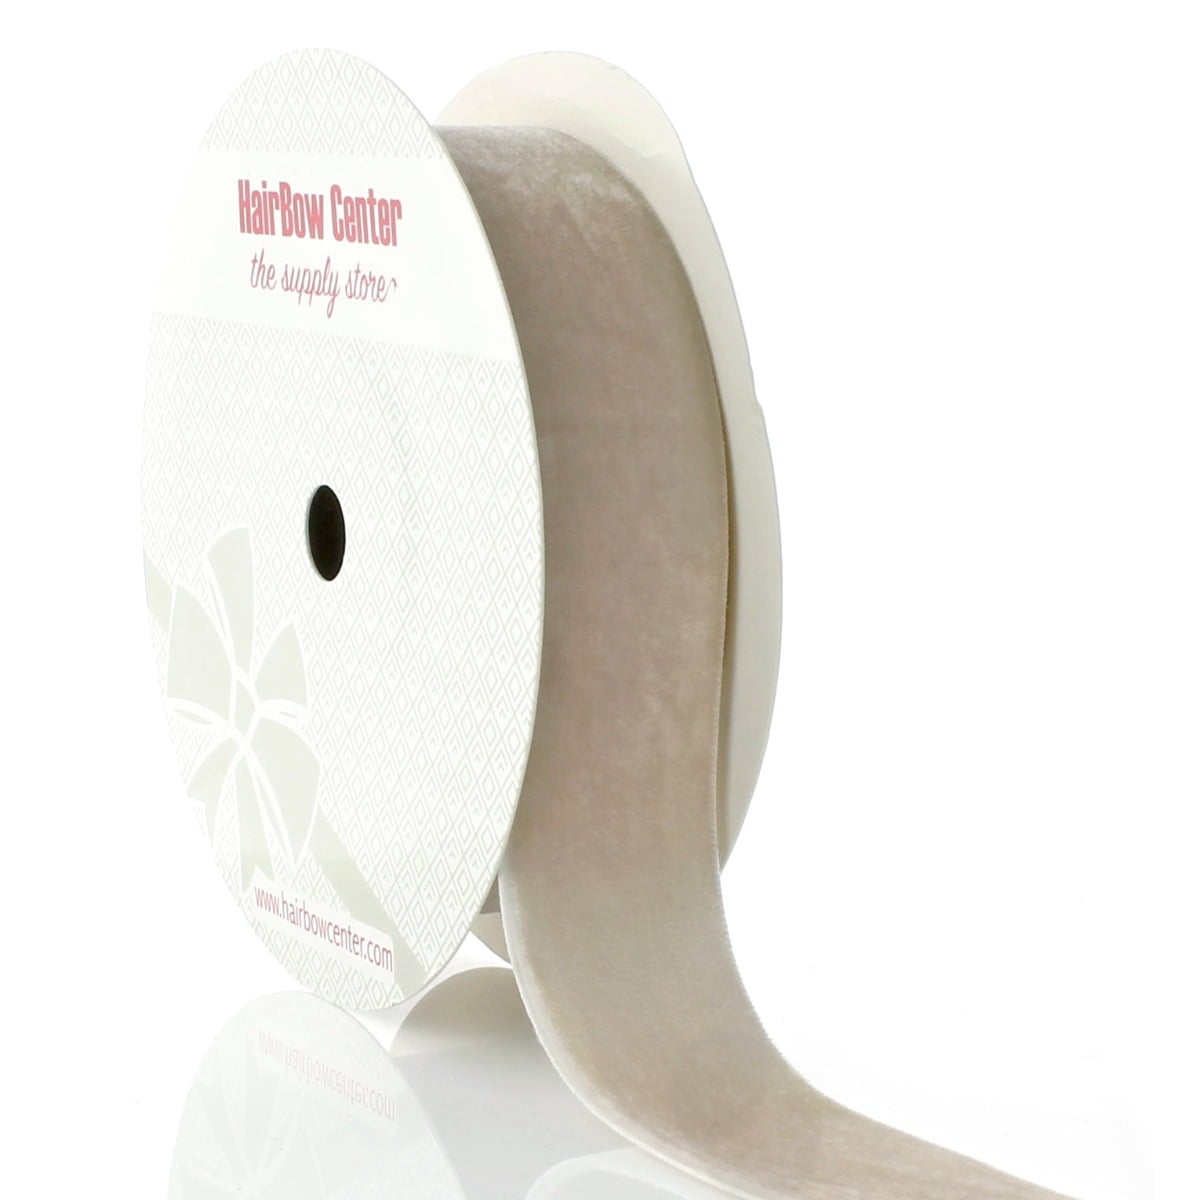 Velvet Ribbon - Wrinkle and Crease Paper Products